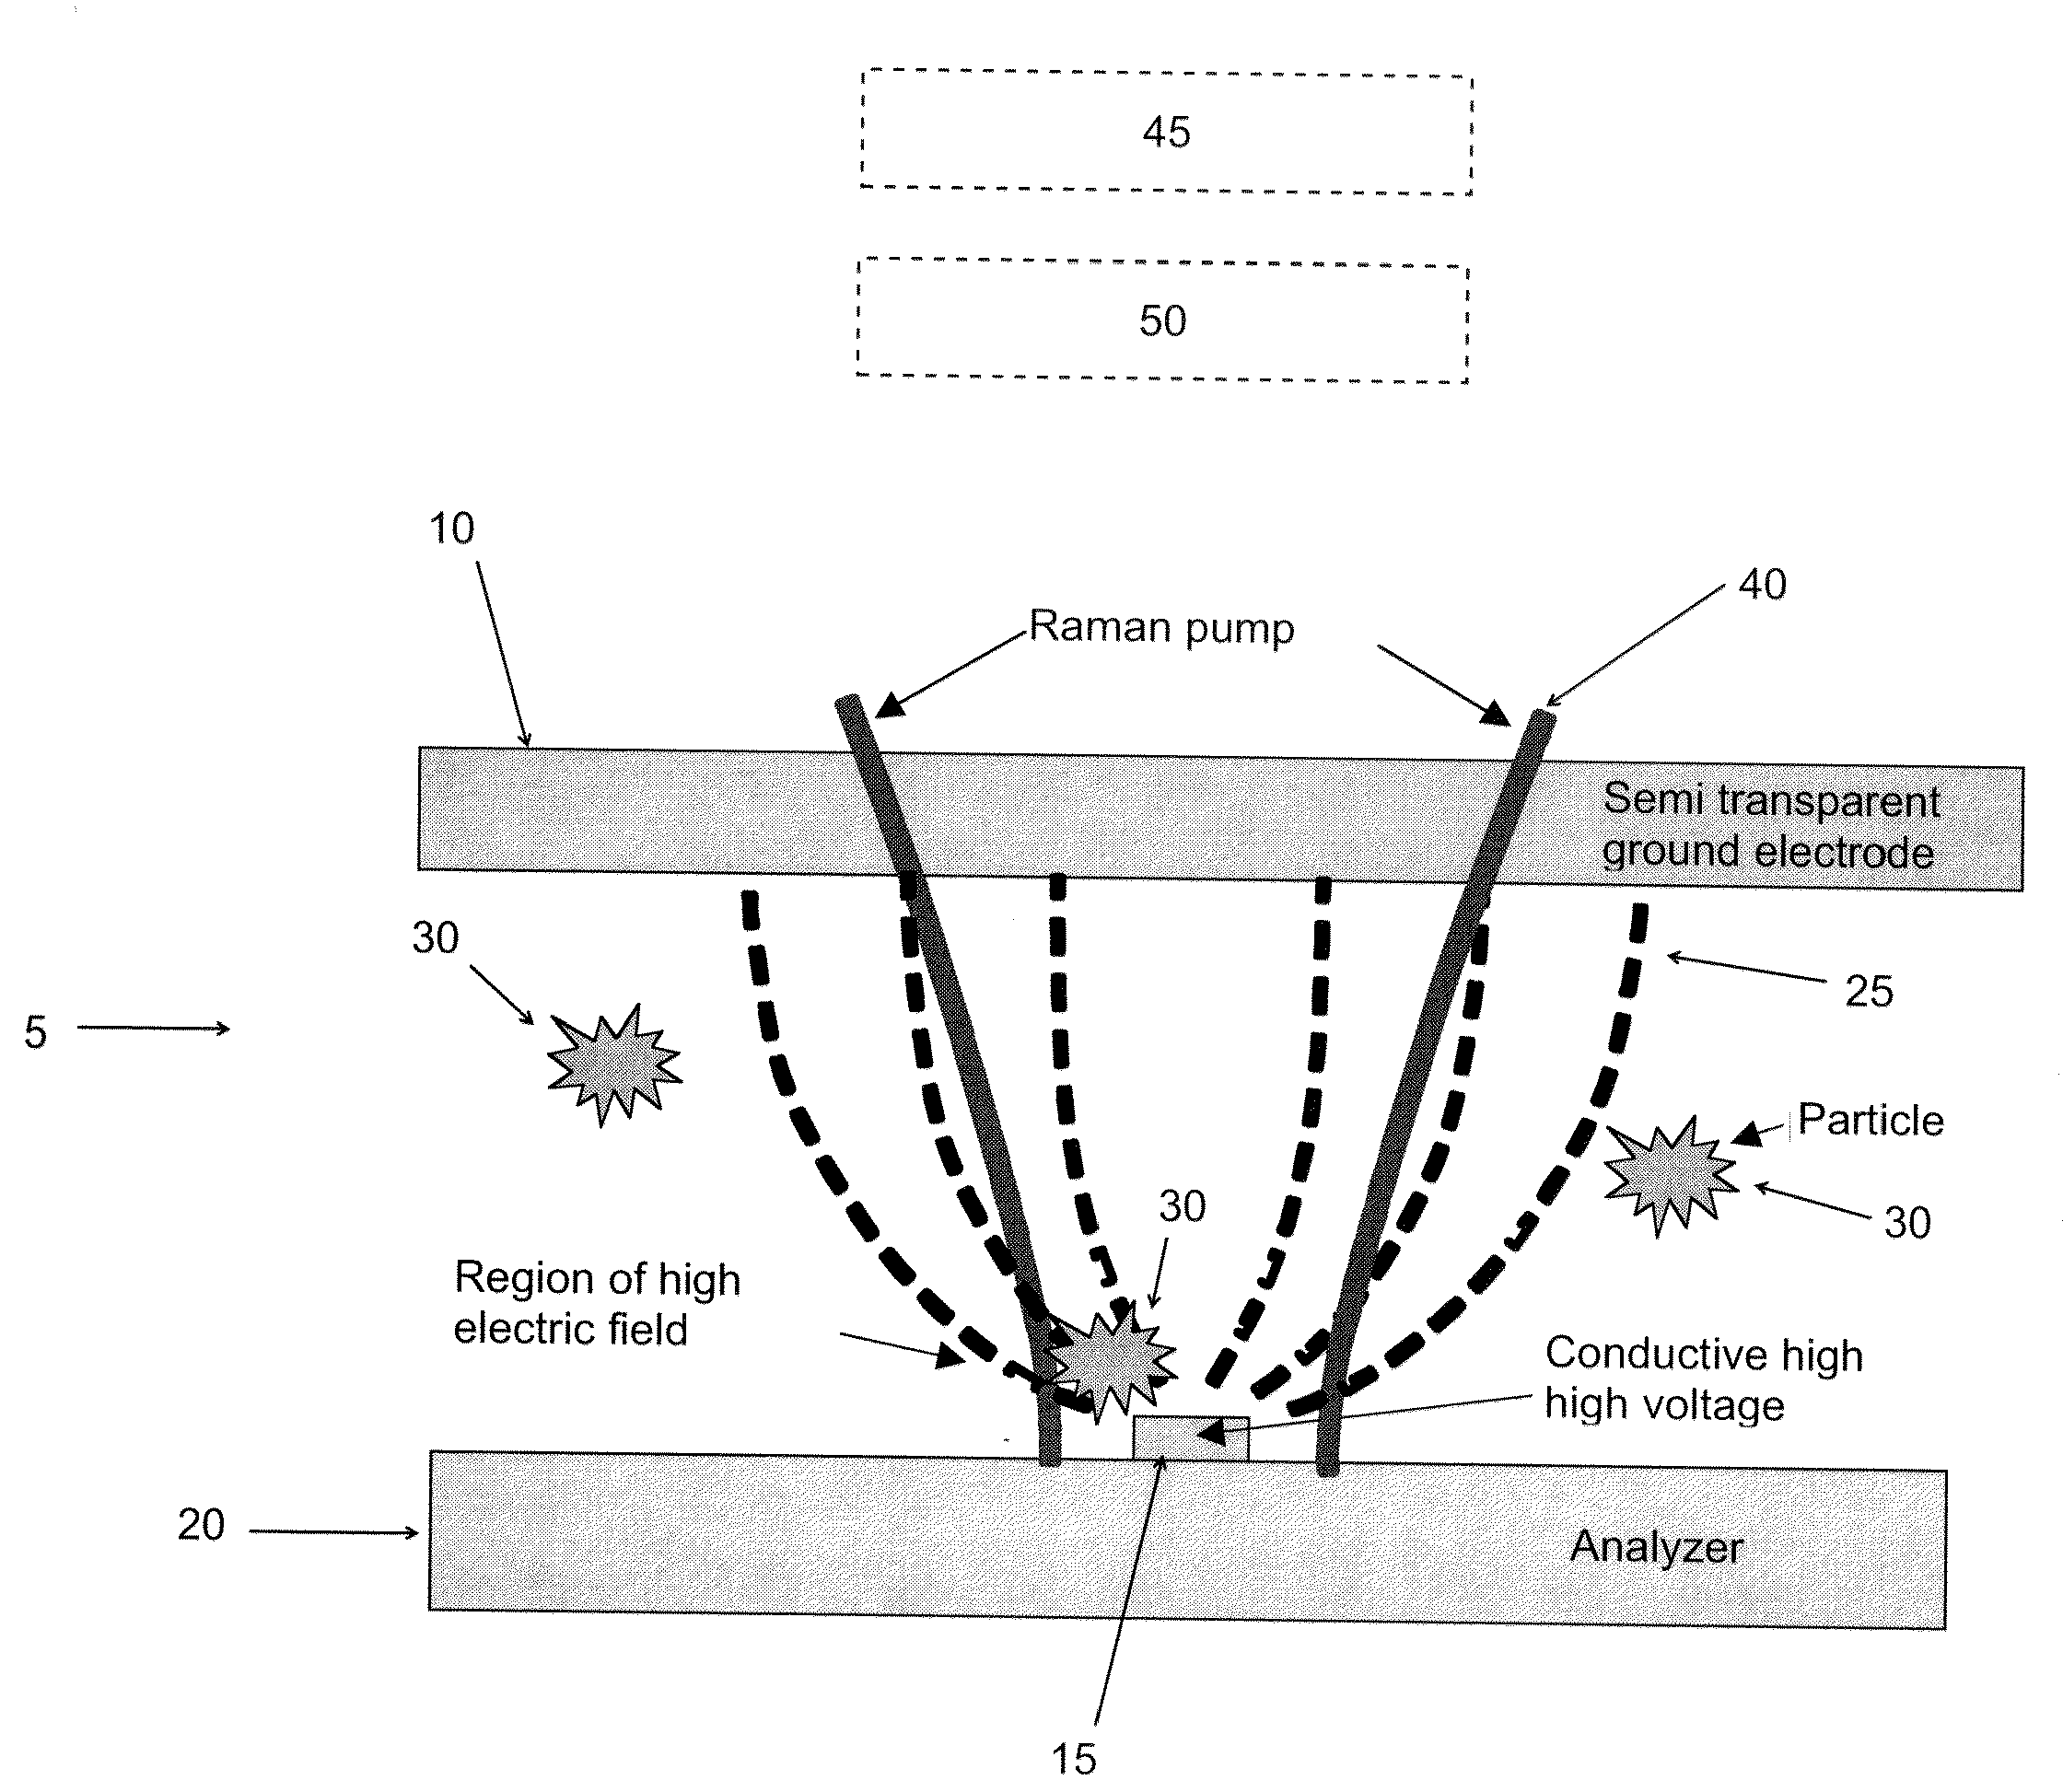 Method and apparatus for incorporating electrostatic concentrators and/or ion mobility separators with Raman, IR, UV, XRF, LIF and LIBS spectroscopy and /or other spectroscopic techniques